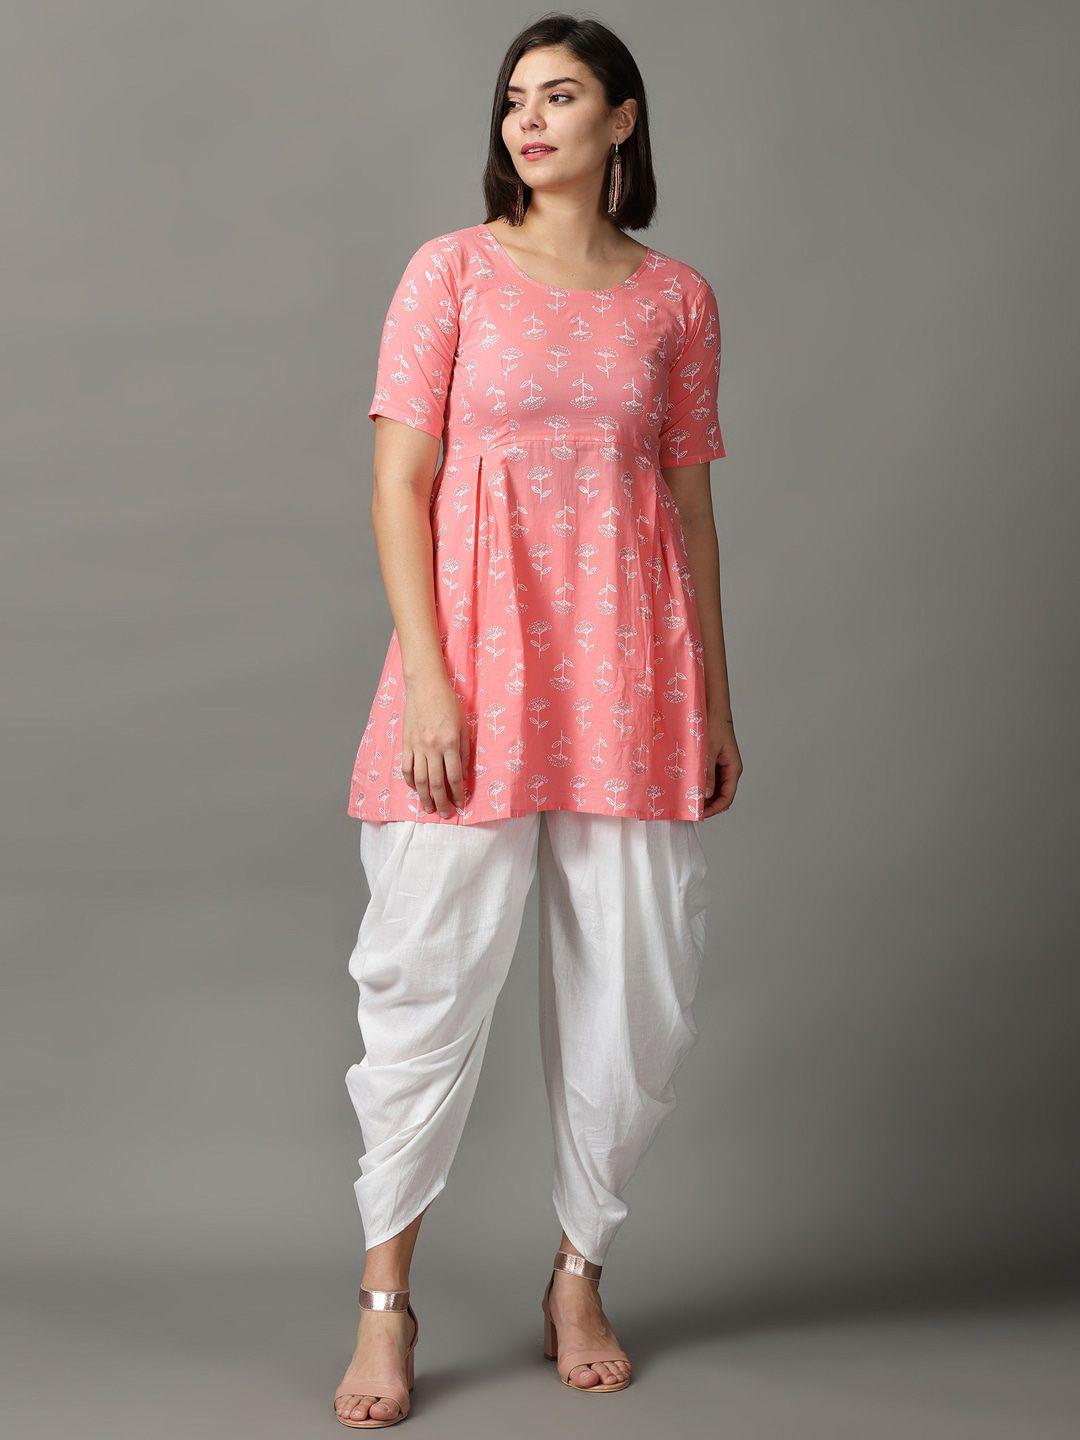 divination women pink floral printed pure cotton kurti with dhoti pants